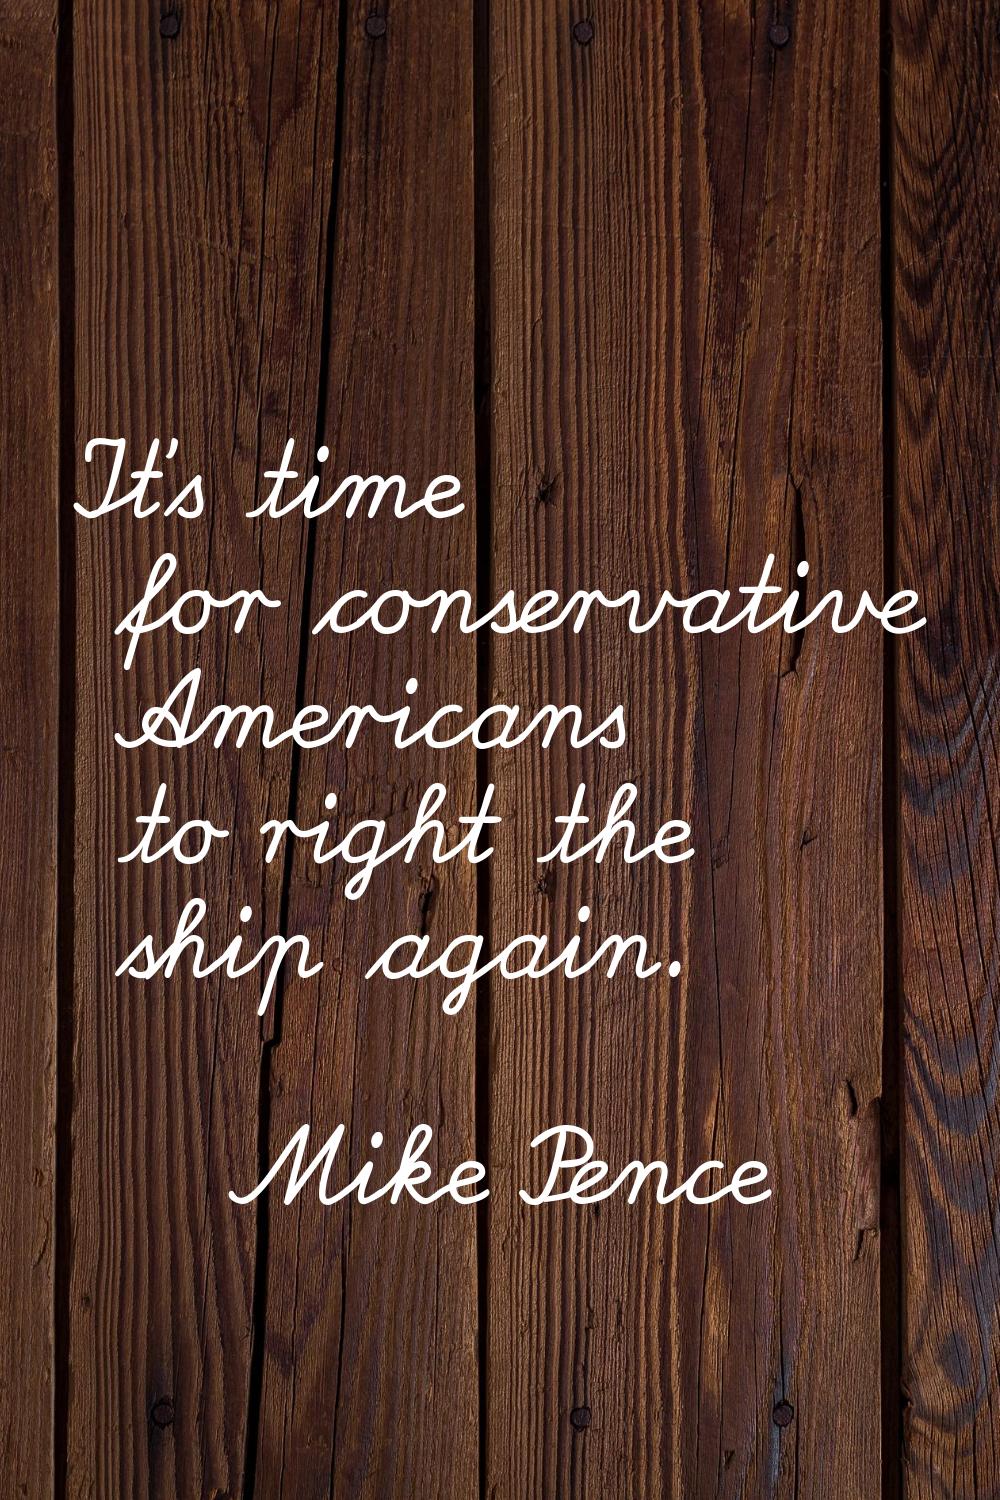 It's time for conservative Americans to right the ship again.